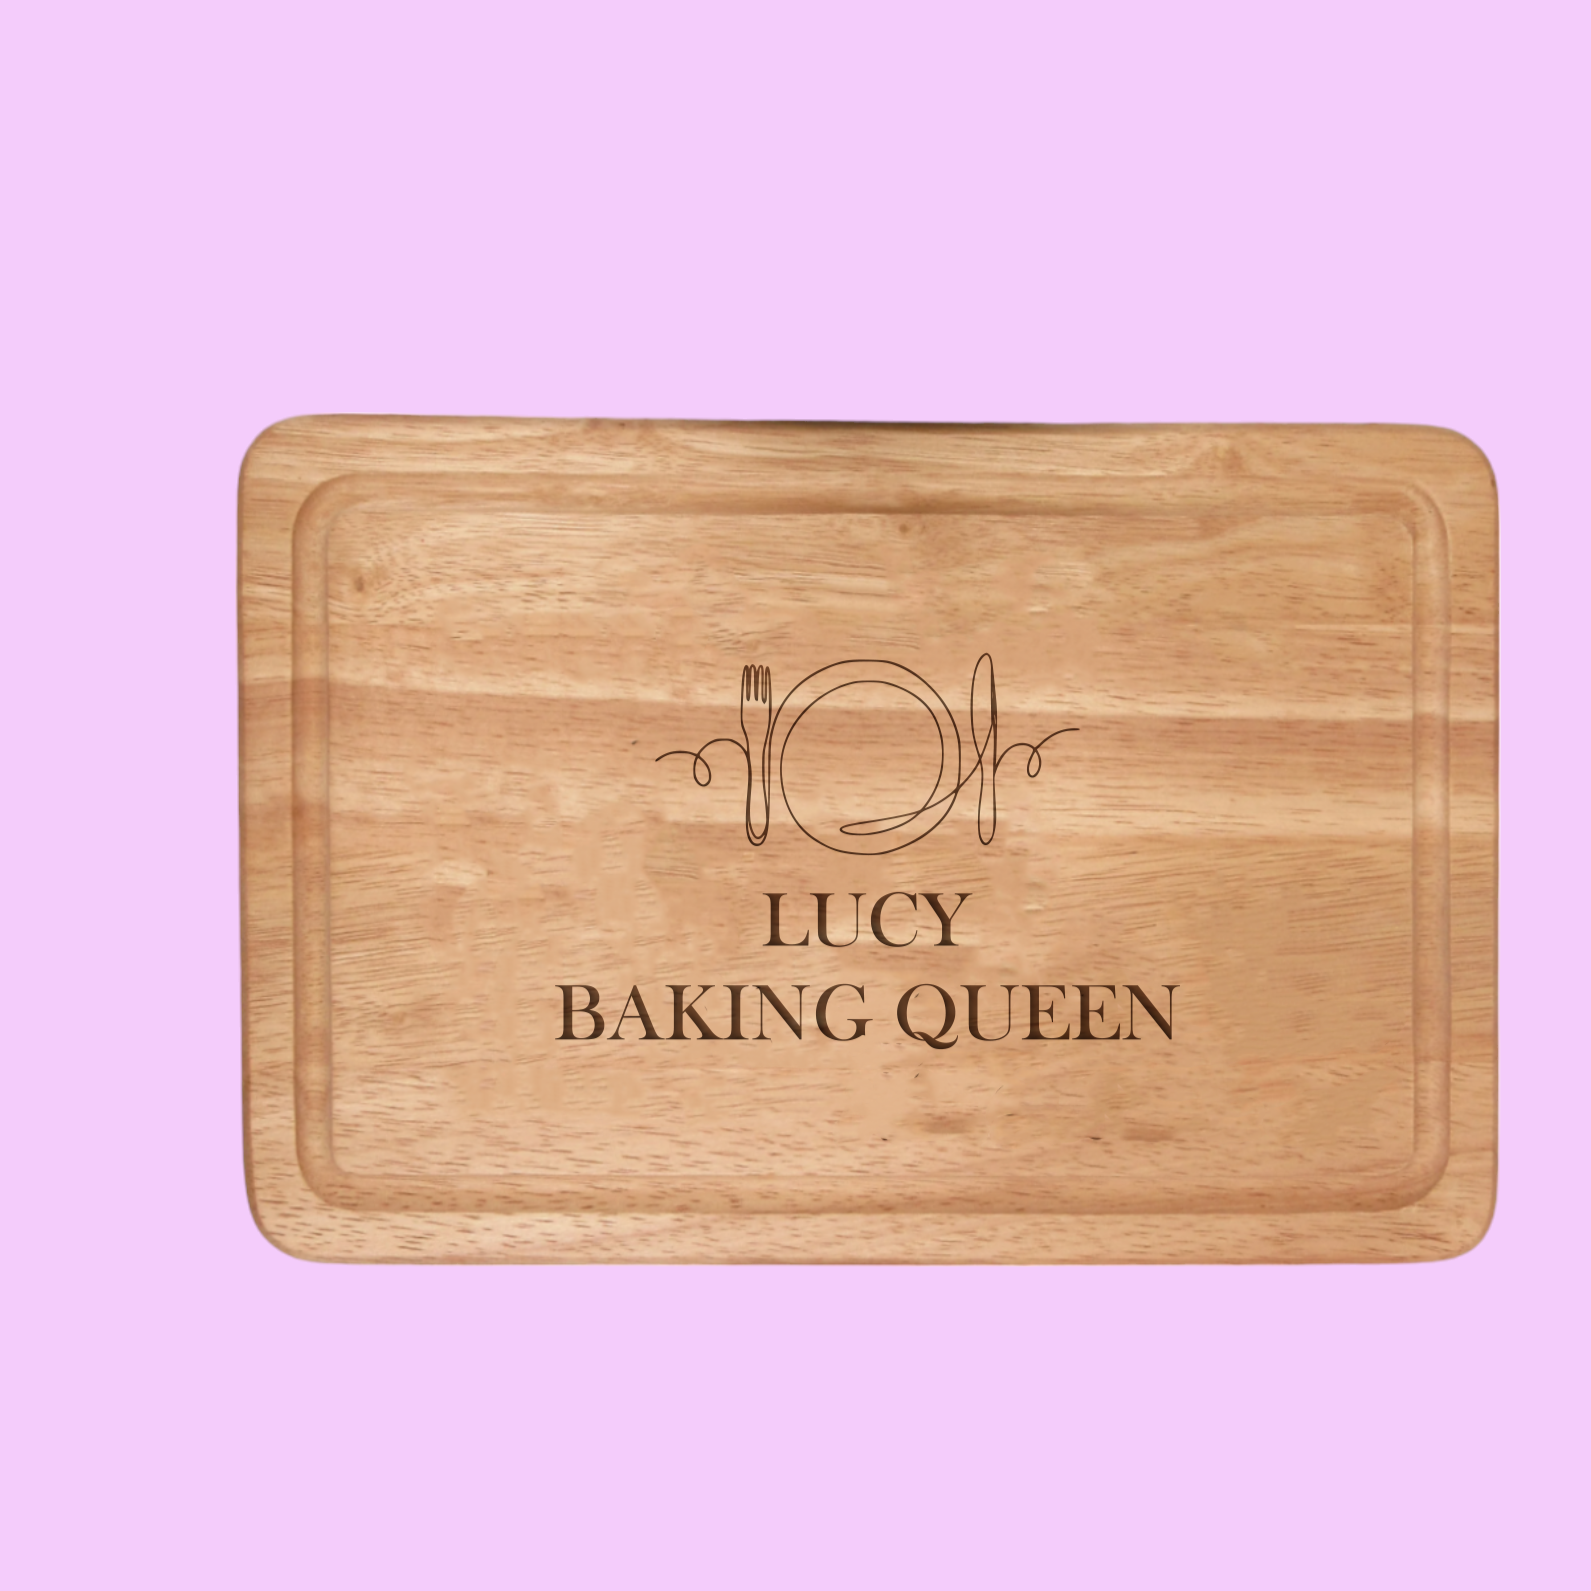 Transform your kitchen with our Personalised Chopping Board Knife & Fork Design. Add 2 lines of text (max 20 characters each in caps) on this 300mmX200mm premium wood board. An ideal gift for housewarmings or special occasions, it brings personalized perfection to your cooking. Versatile and elegant, create a unique culinary experience. Tip: Hand-wash only for lasting allure.